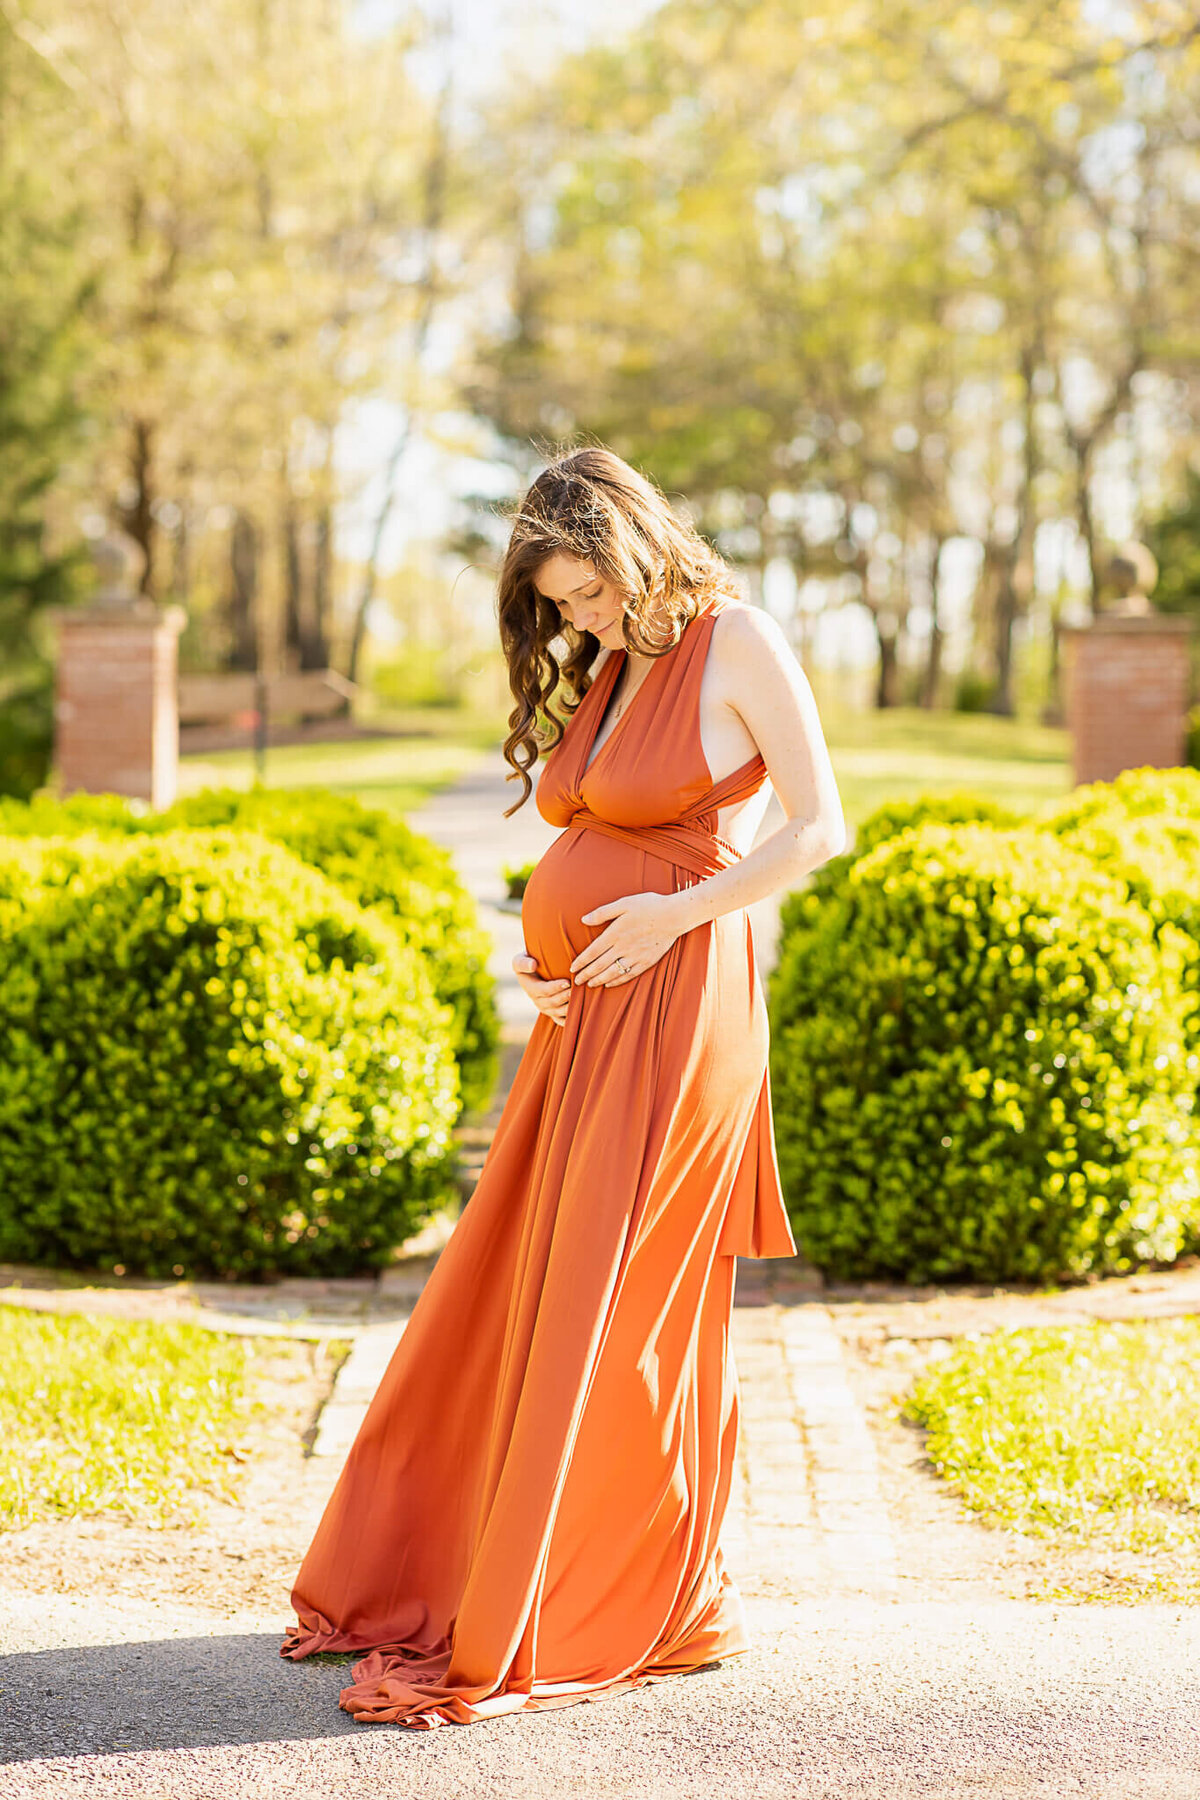 Expectant mom in a burnt orange dress in a garden